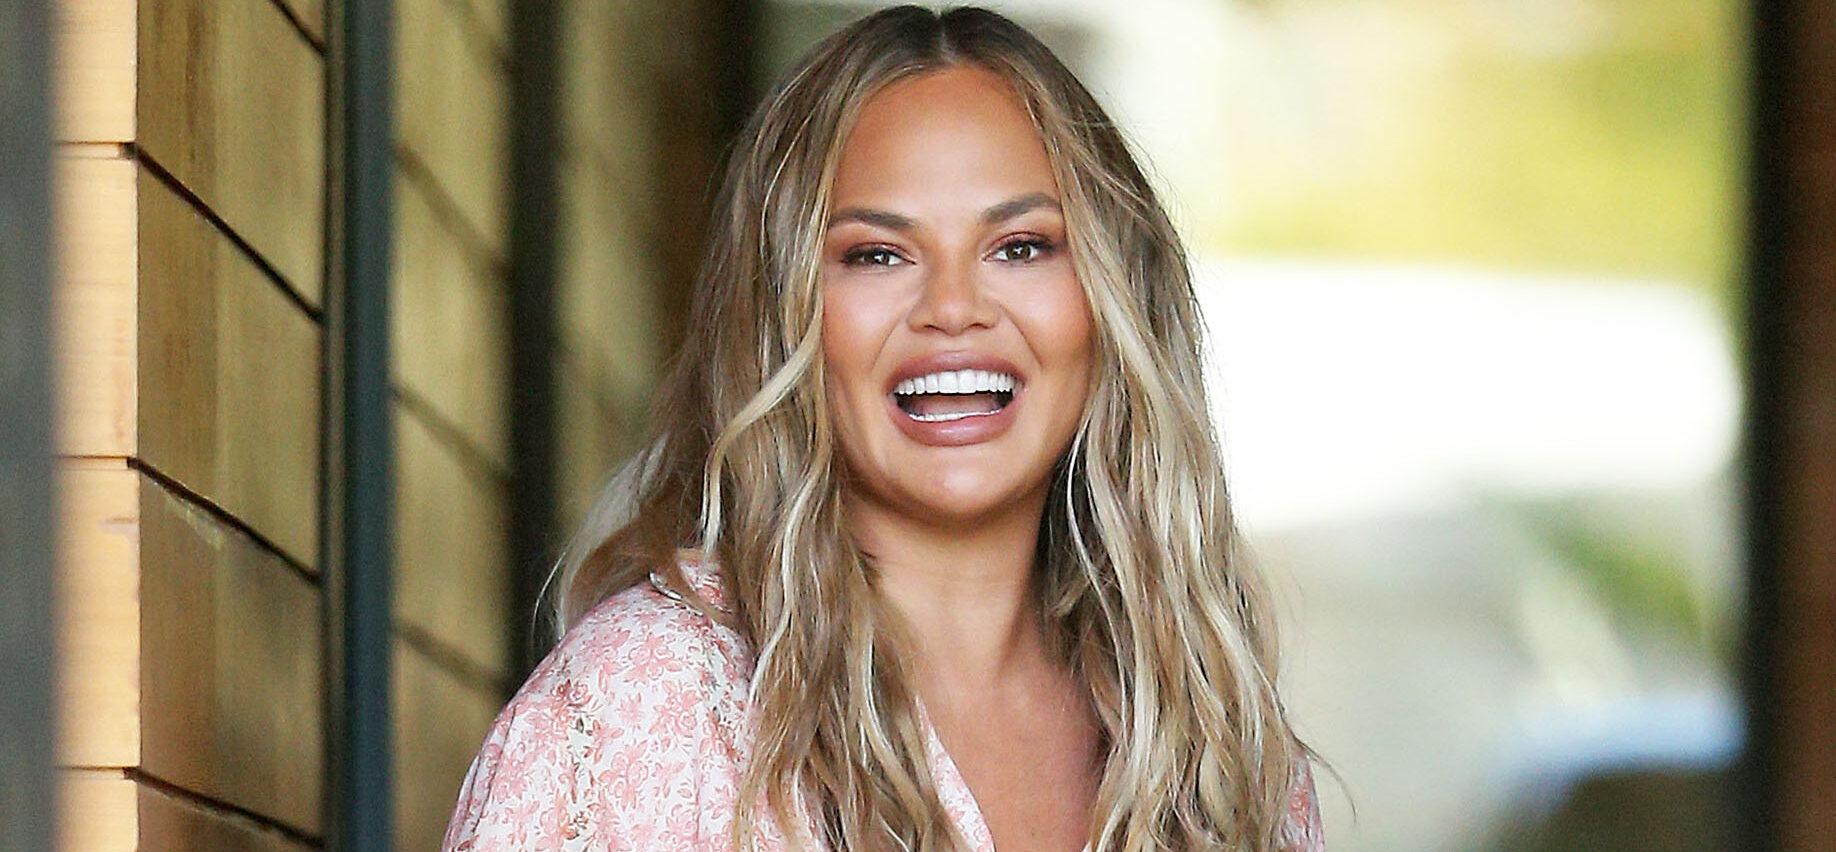 Chrissy Teigen Fans Are ‘Losing It’ Over ‘OBVIOUS’ Photoshop Fail